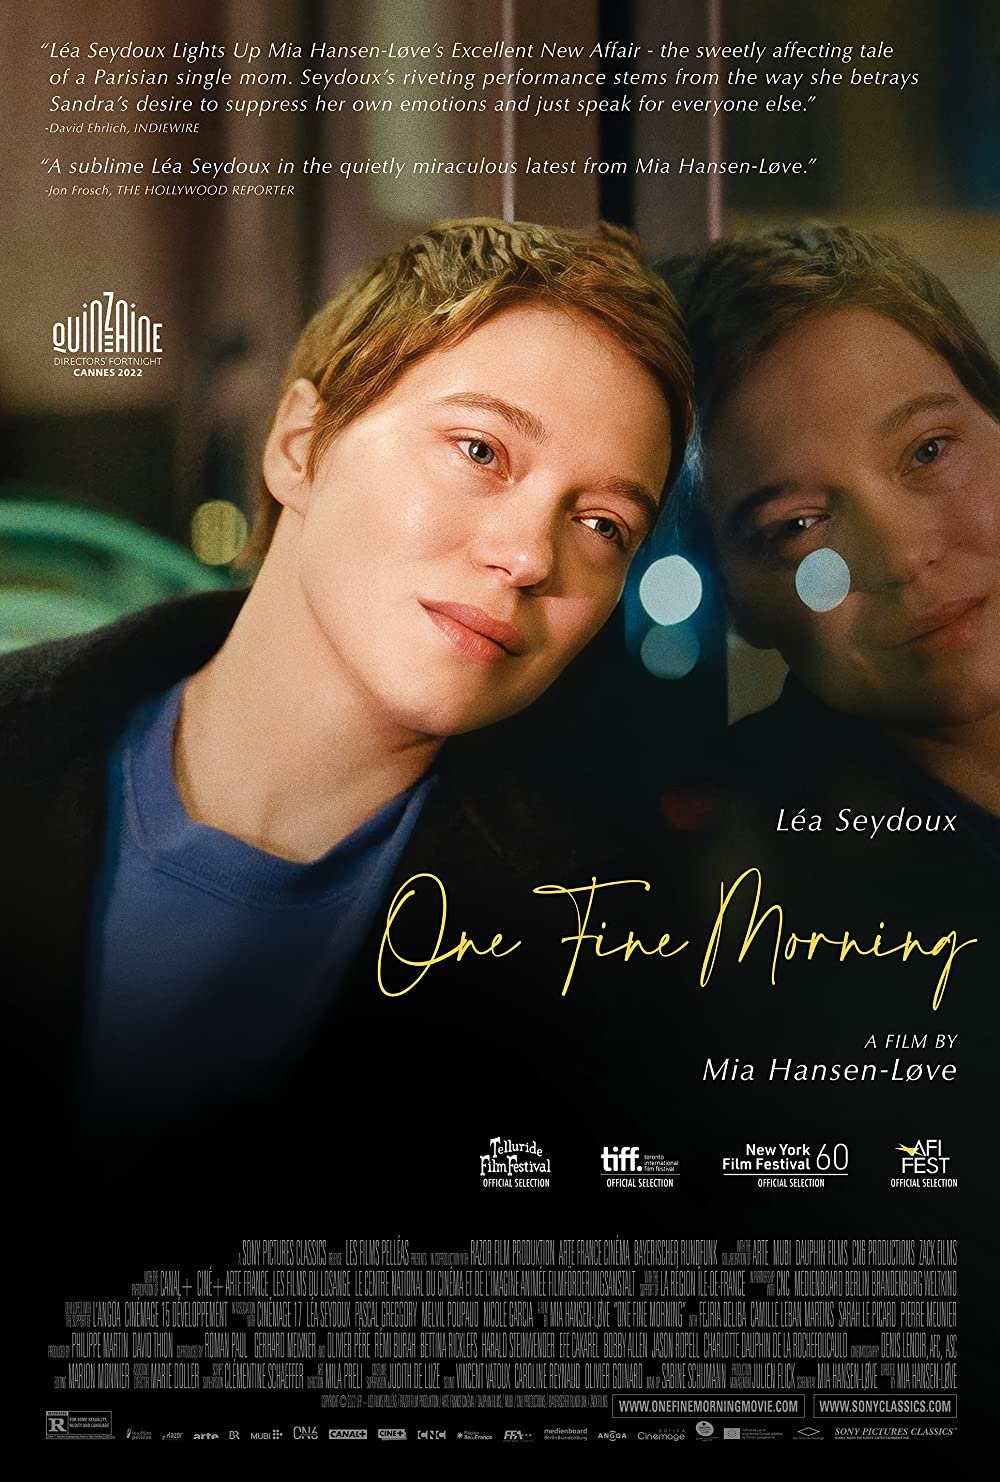 Cinema Without Borders: Struggles of a woman in 'One Fine Morning